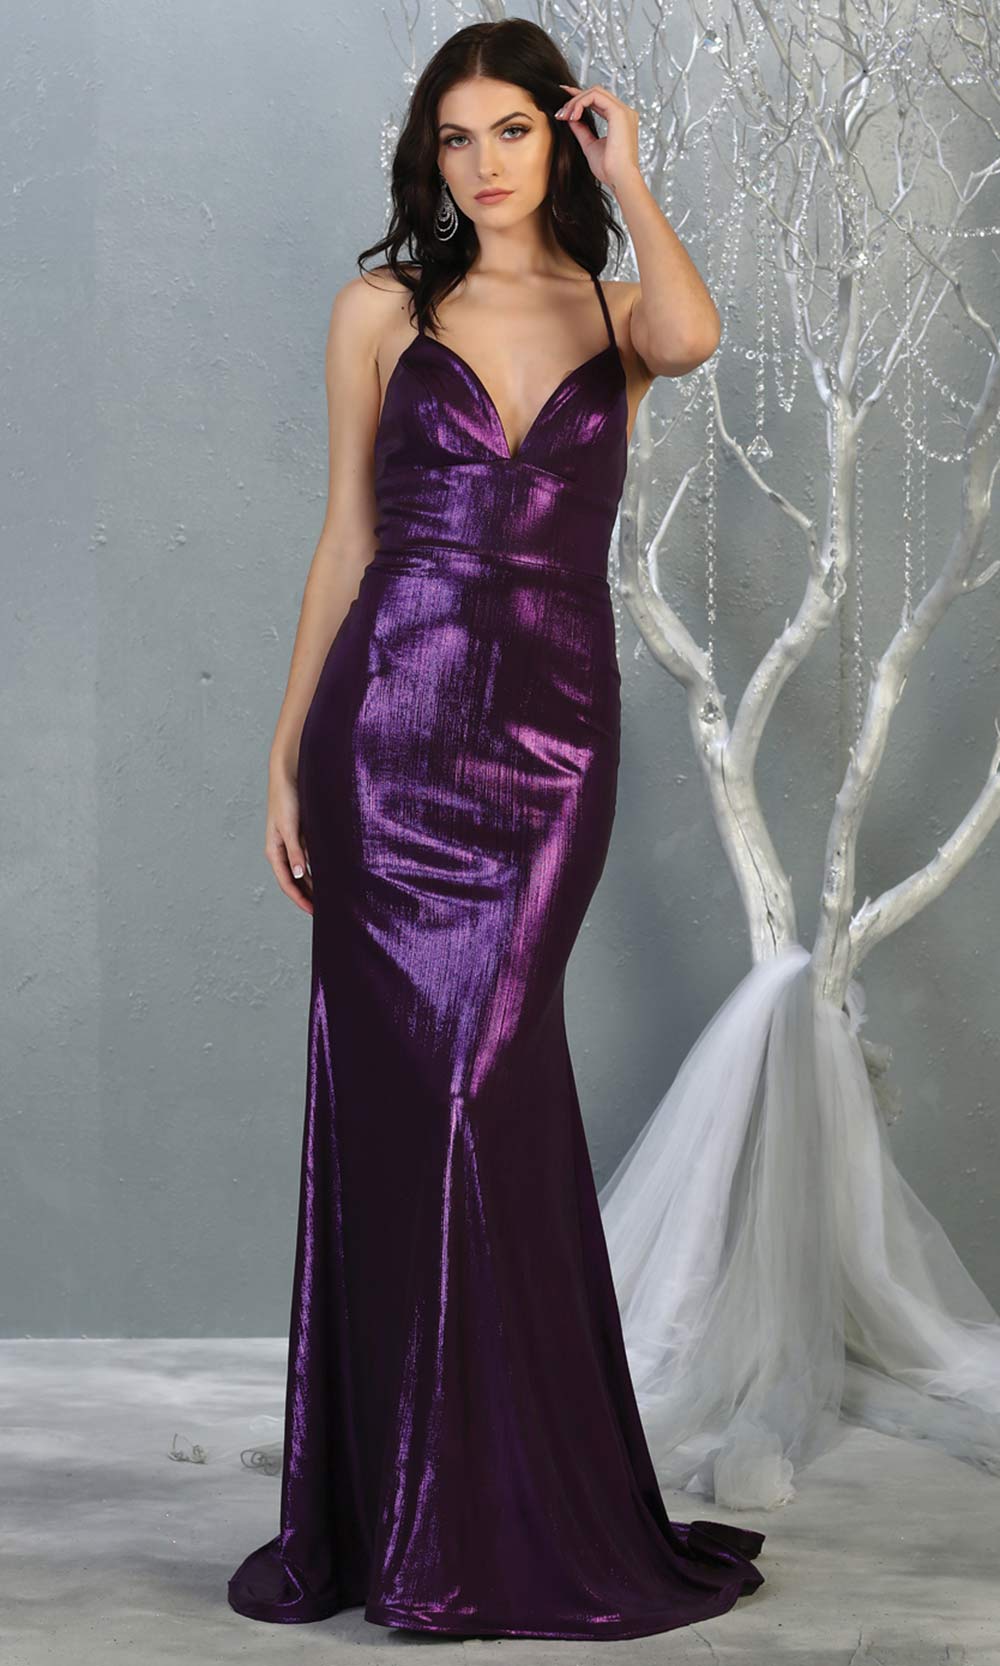 Mayqueen MQ1827 long dark purple sexy fitted shiny prom mermaid dress w/open back. Full length eggplant gown is perfect for enagagement/e-shoot dress, wedding reception dress, indowestern gown, formal evening party dress, prom. Plus sizes avail1.jpg